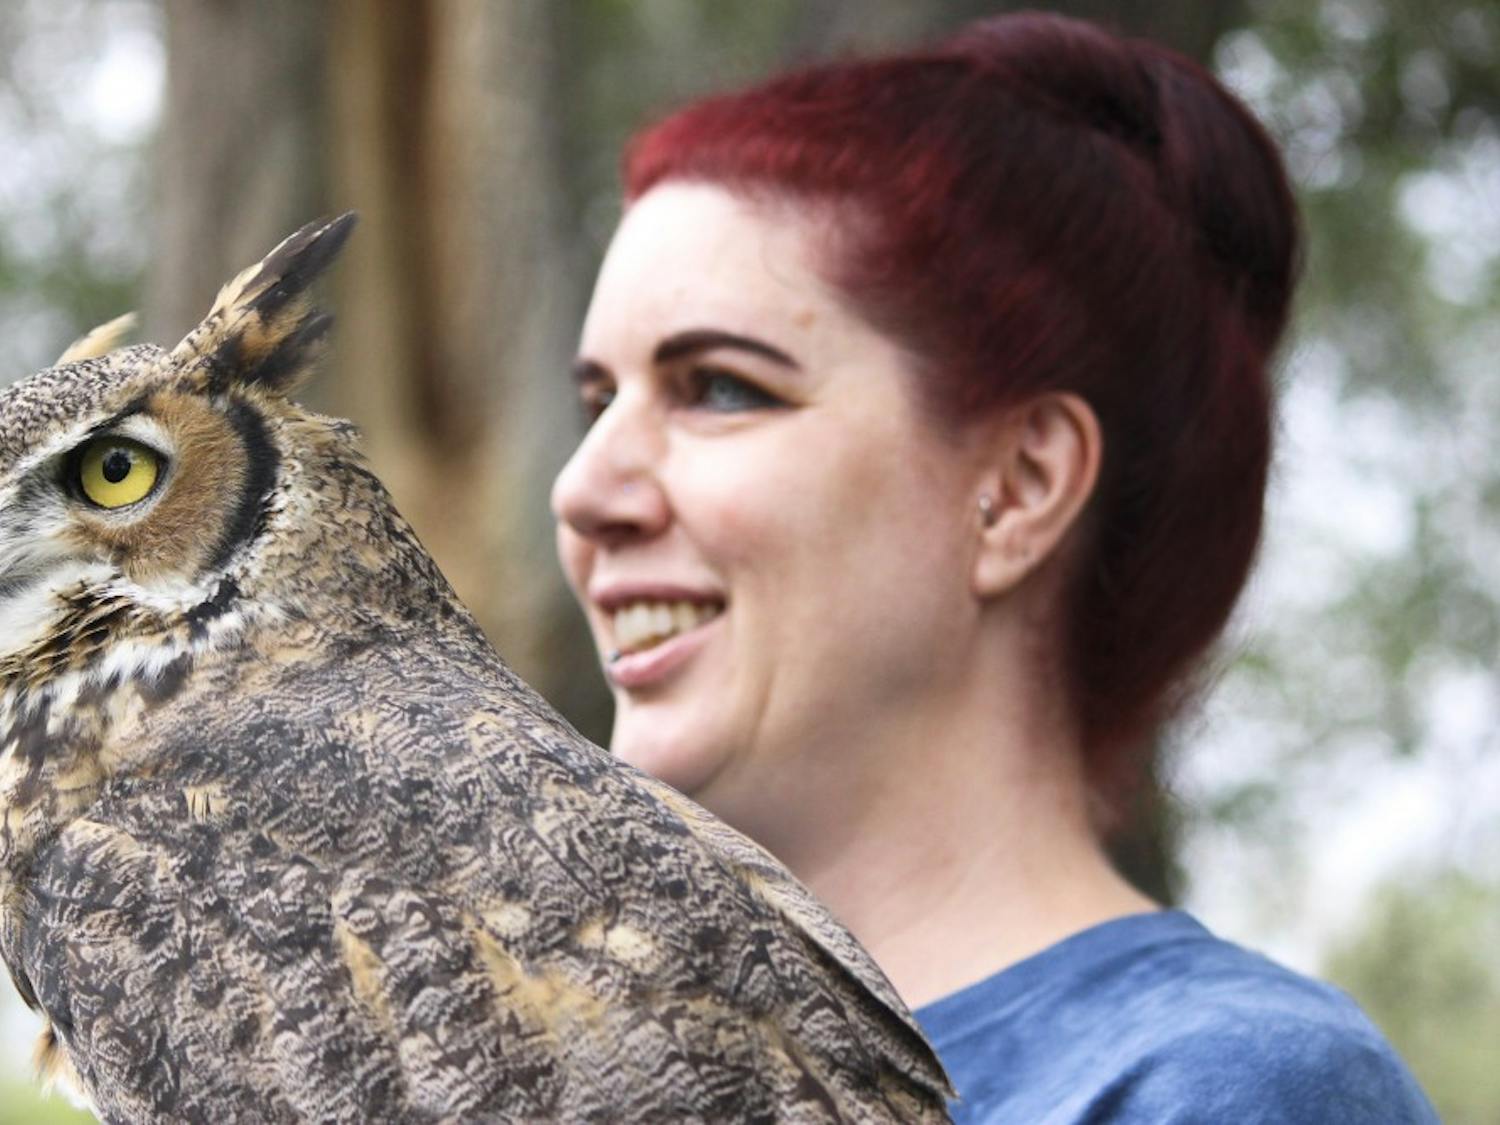 Tracy Birtel holds a Grey Horned Owl at Sunday’s event. Birtel and her colleagues are part of Wildlife Rescue of New Mexico, which helps rescue and rehabilitate injured animals before returning them to the wild.